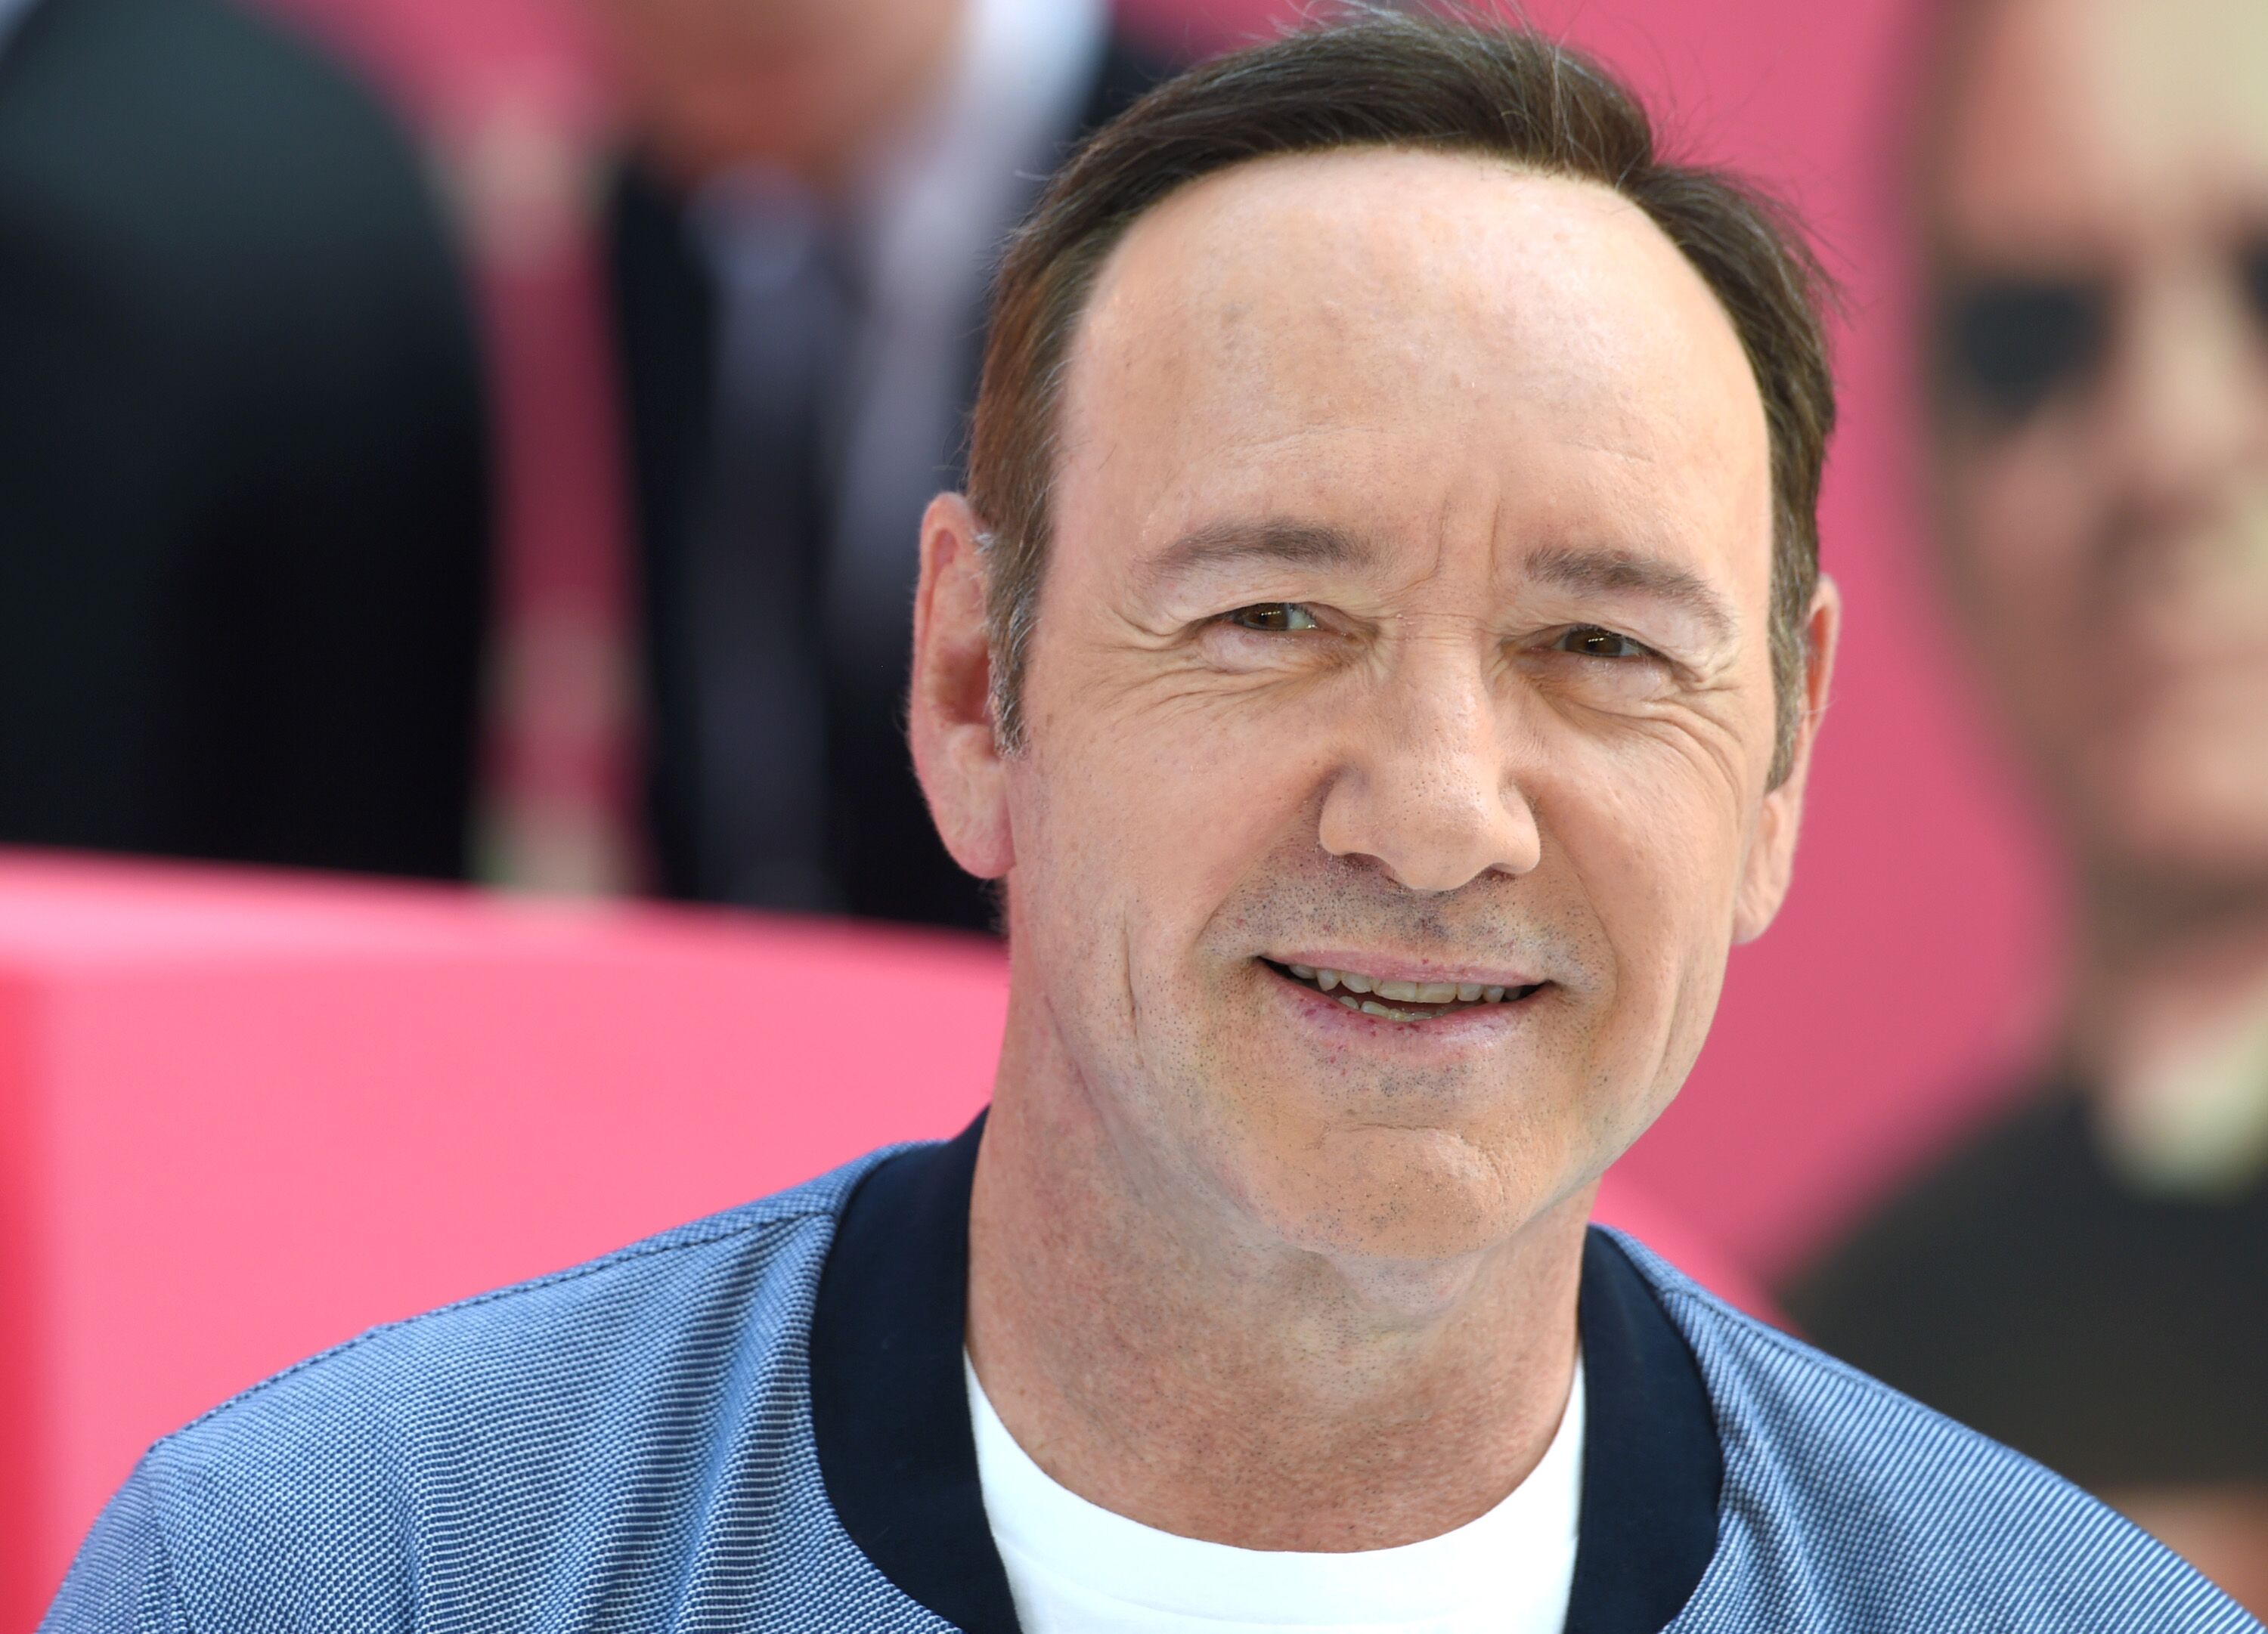 Kevin Spacey attends the European premiere of "Baby Driver." | Source: Getty Images